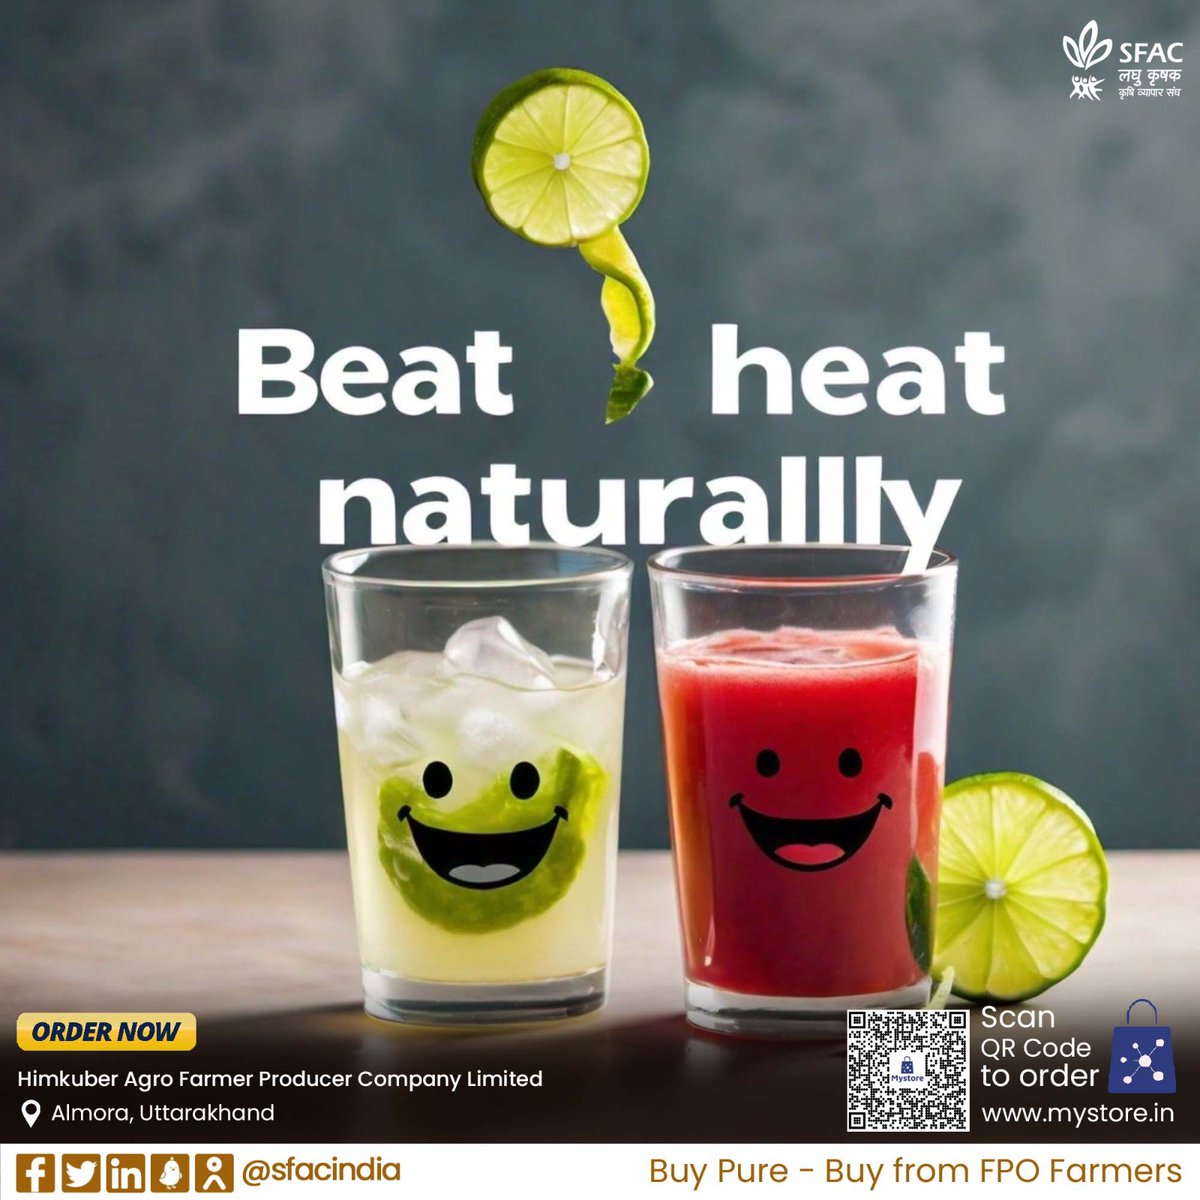 Drink pure. Buy this antioxidant-rich combo of lemon and buransh juice straight from FPO farmers. A delicious way to boost your immunity and beating the heat. Order link👇 mystore.in/en/product/com… 🧃 #VocalForLocal #healthychoices #healthyhabits #tastyrecipes #tastybreakfast